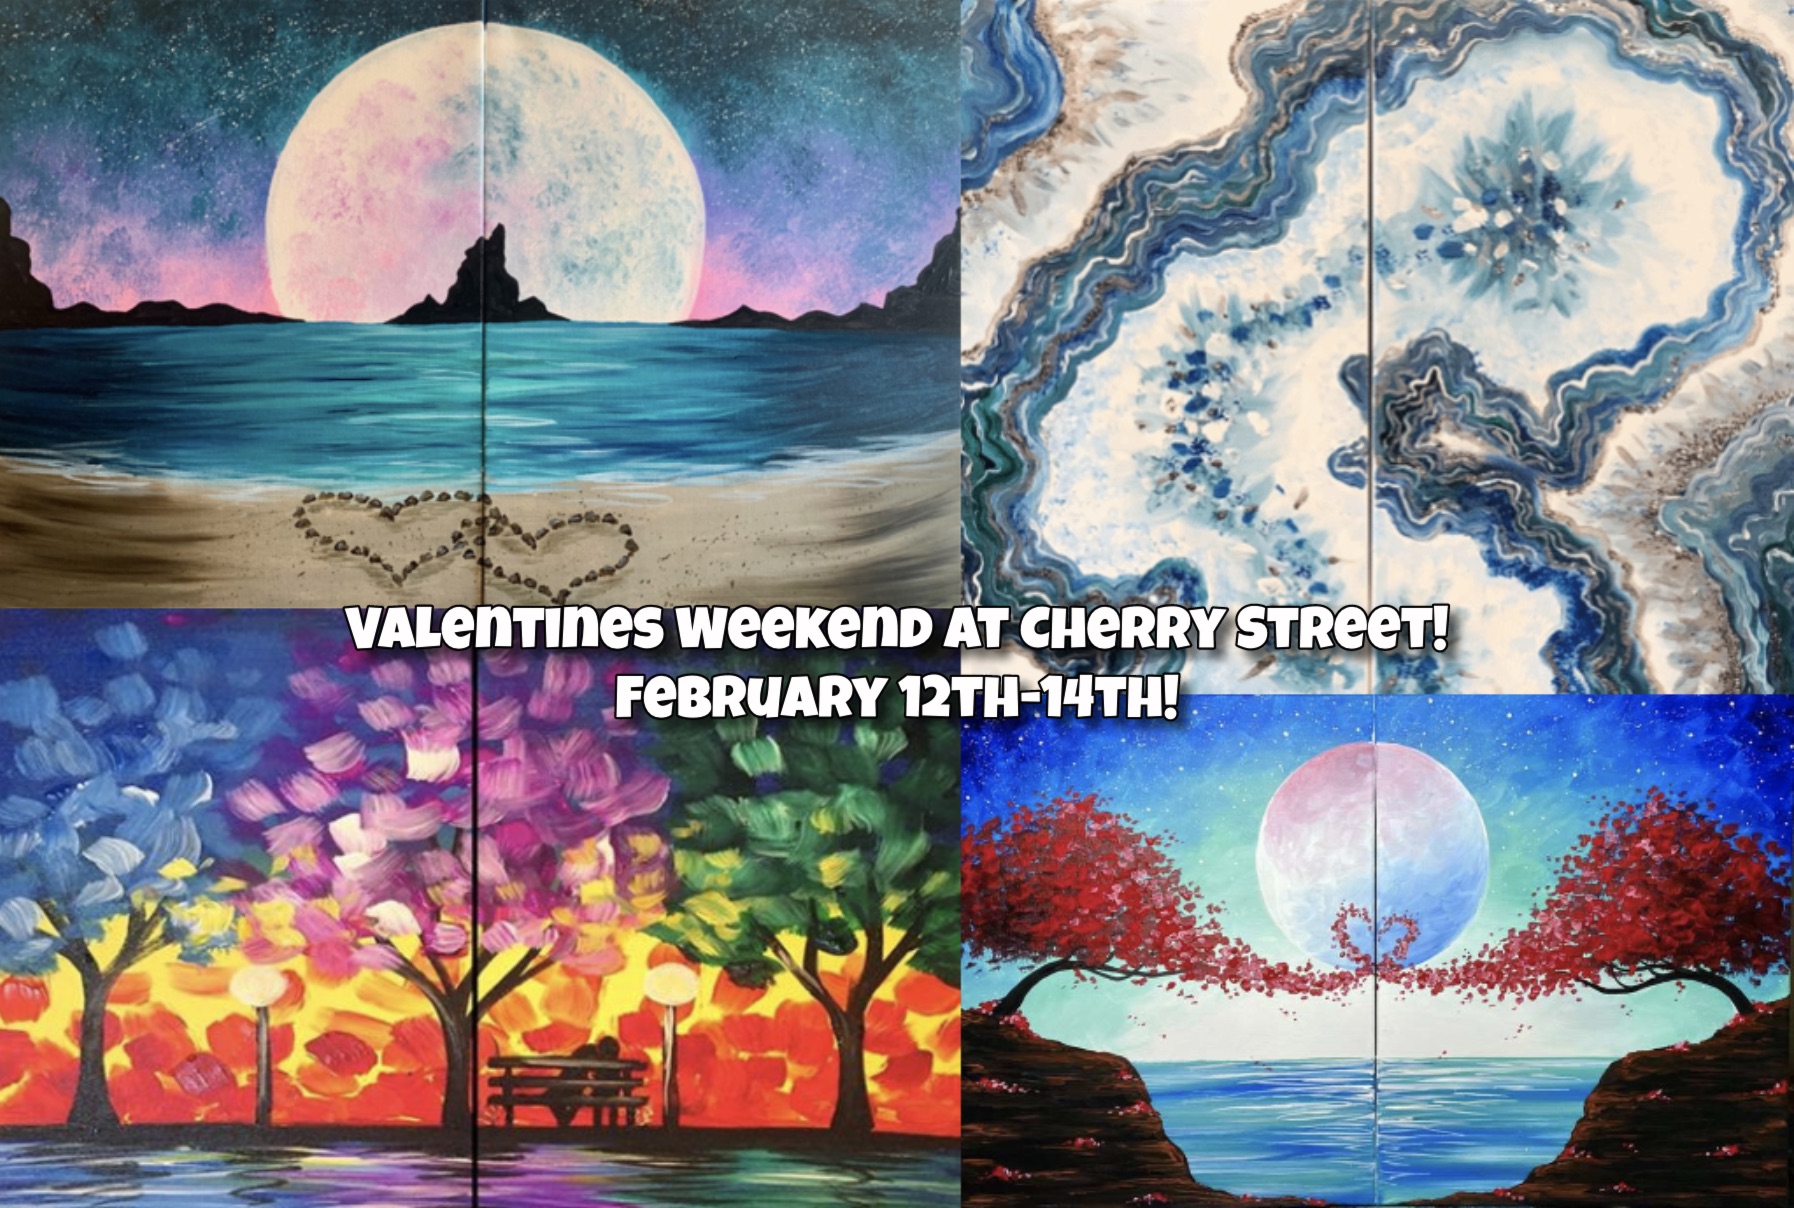 Date Night for Valentine's Day at Cherry Street